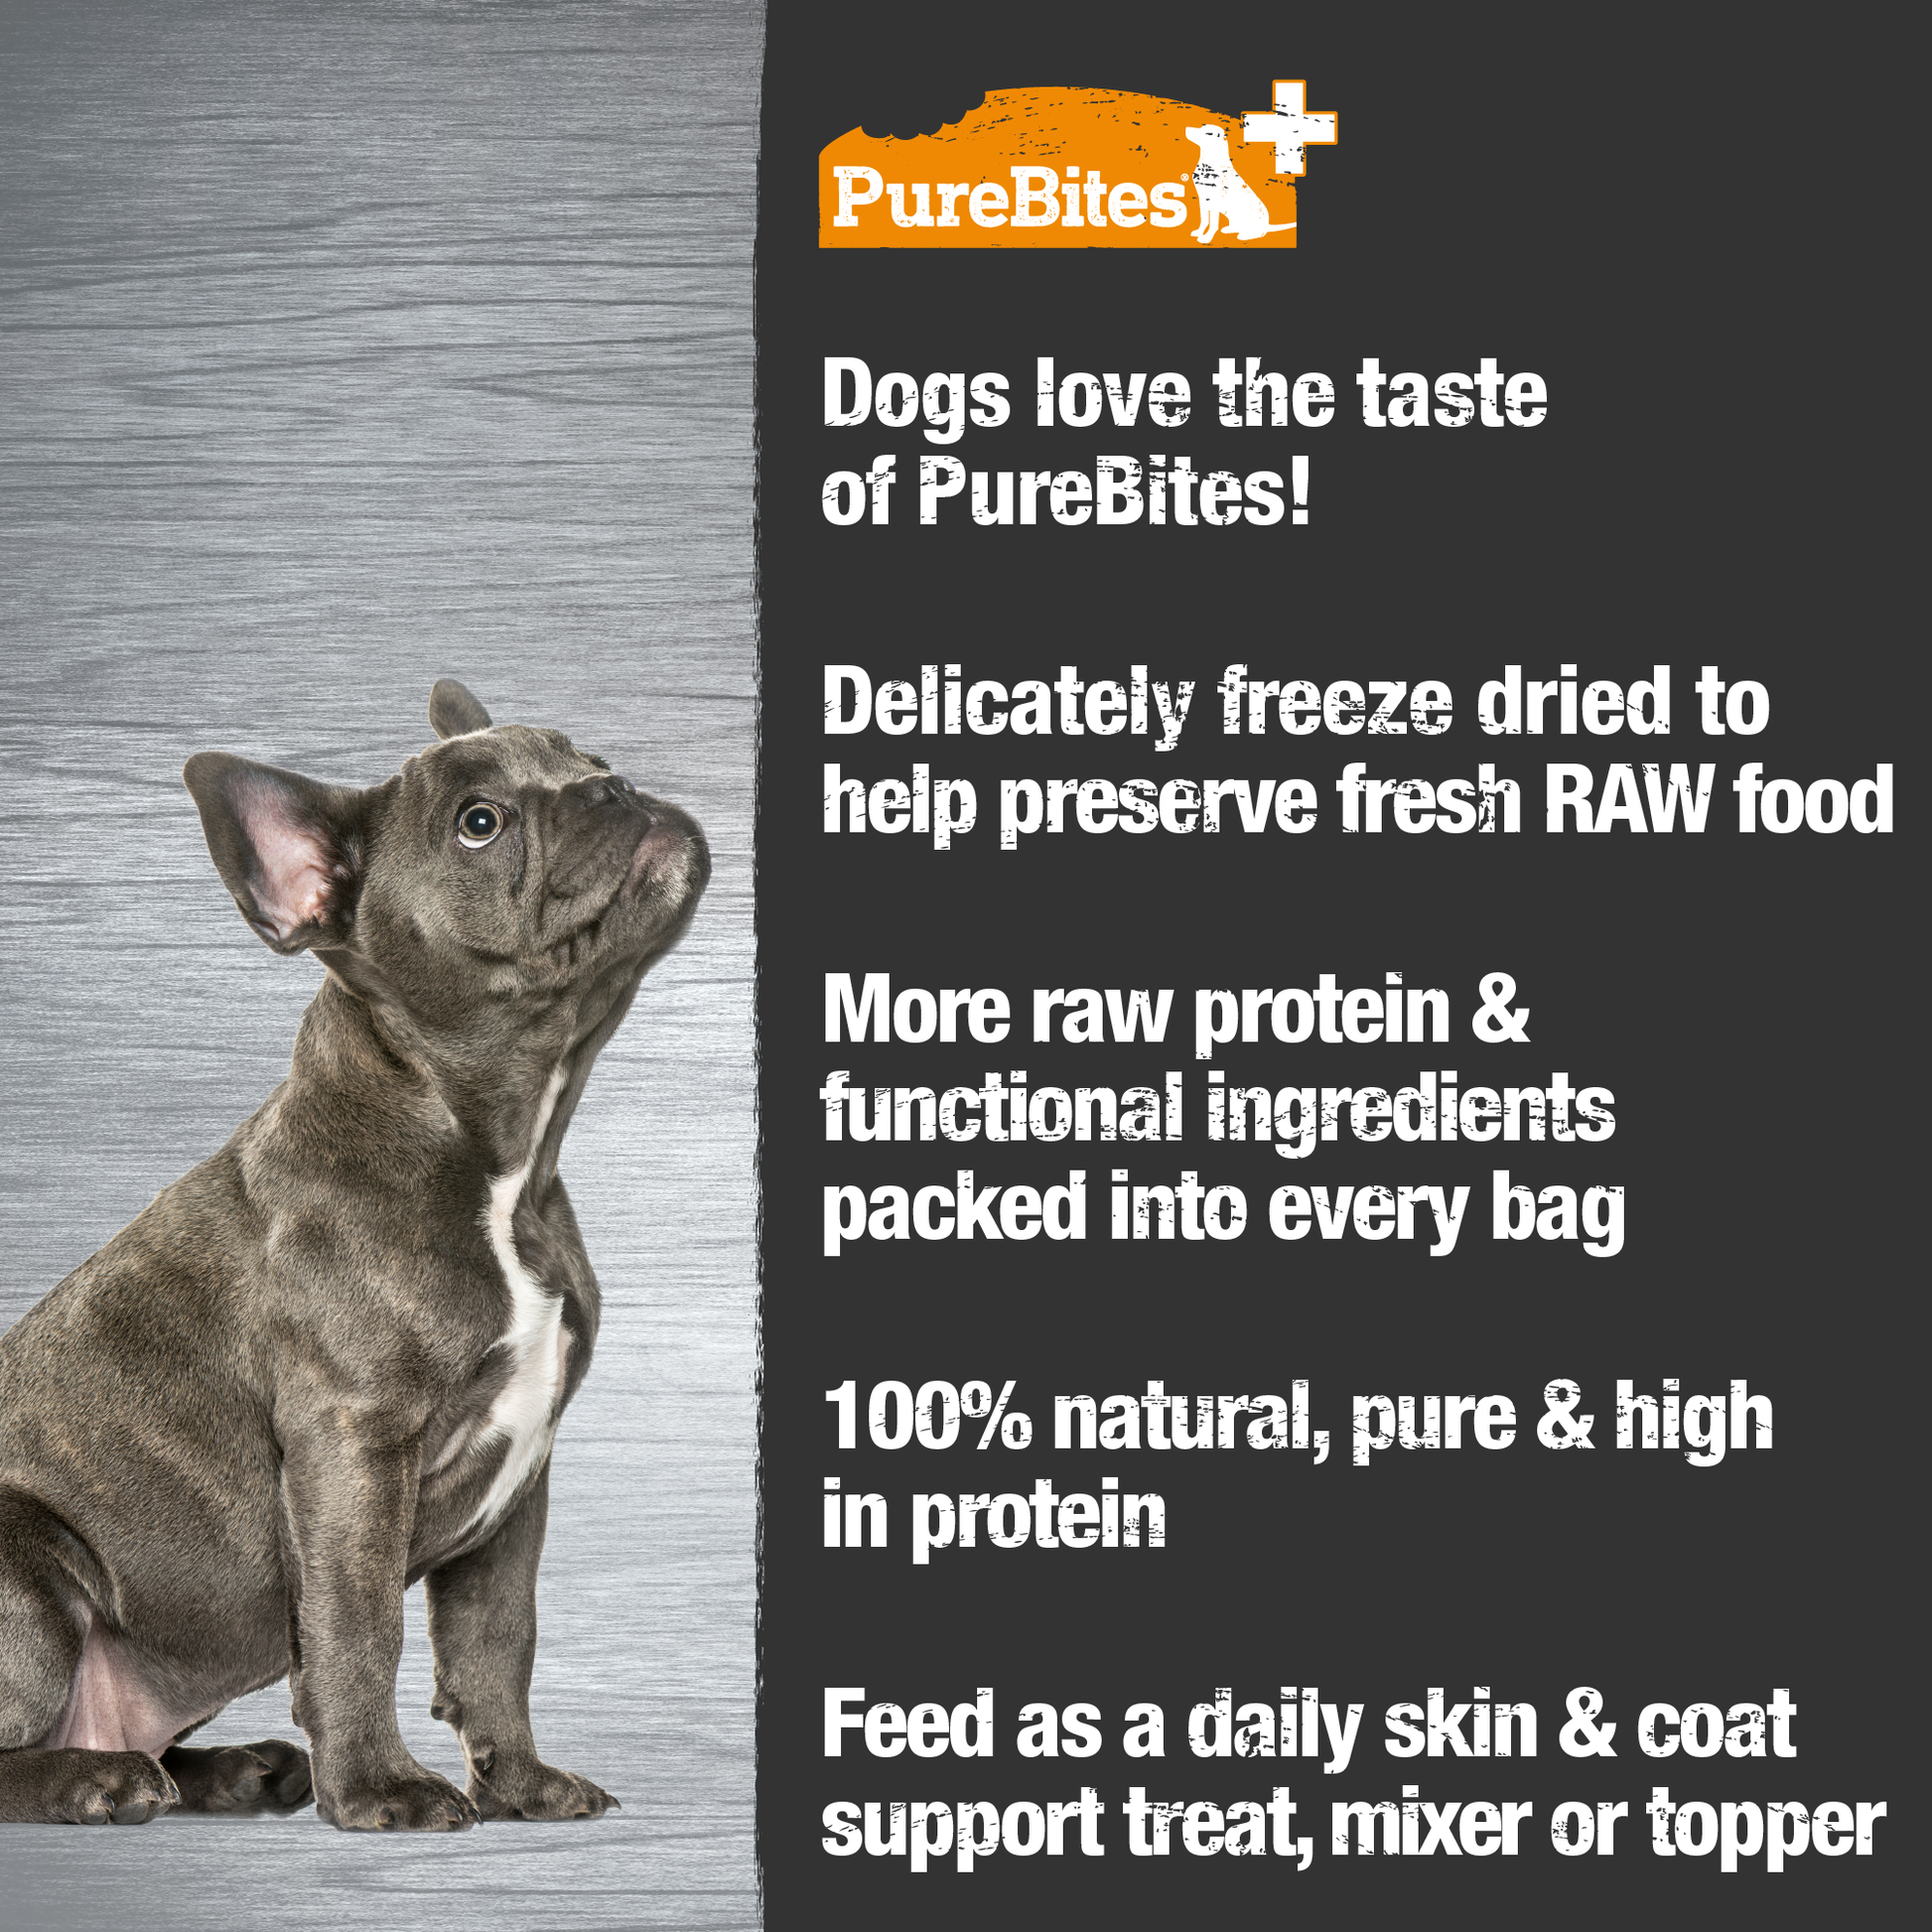 Made fresh & pure means more RAW protein and nutrients packed into every bag. Our skin & coat treats are freeze dried to help preserve its RAW taste, and nutrition, and mirror a dog’s ancestral diet